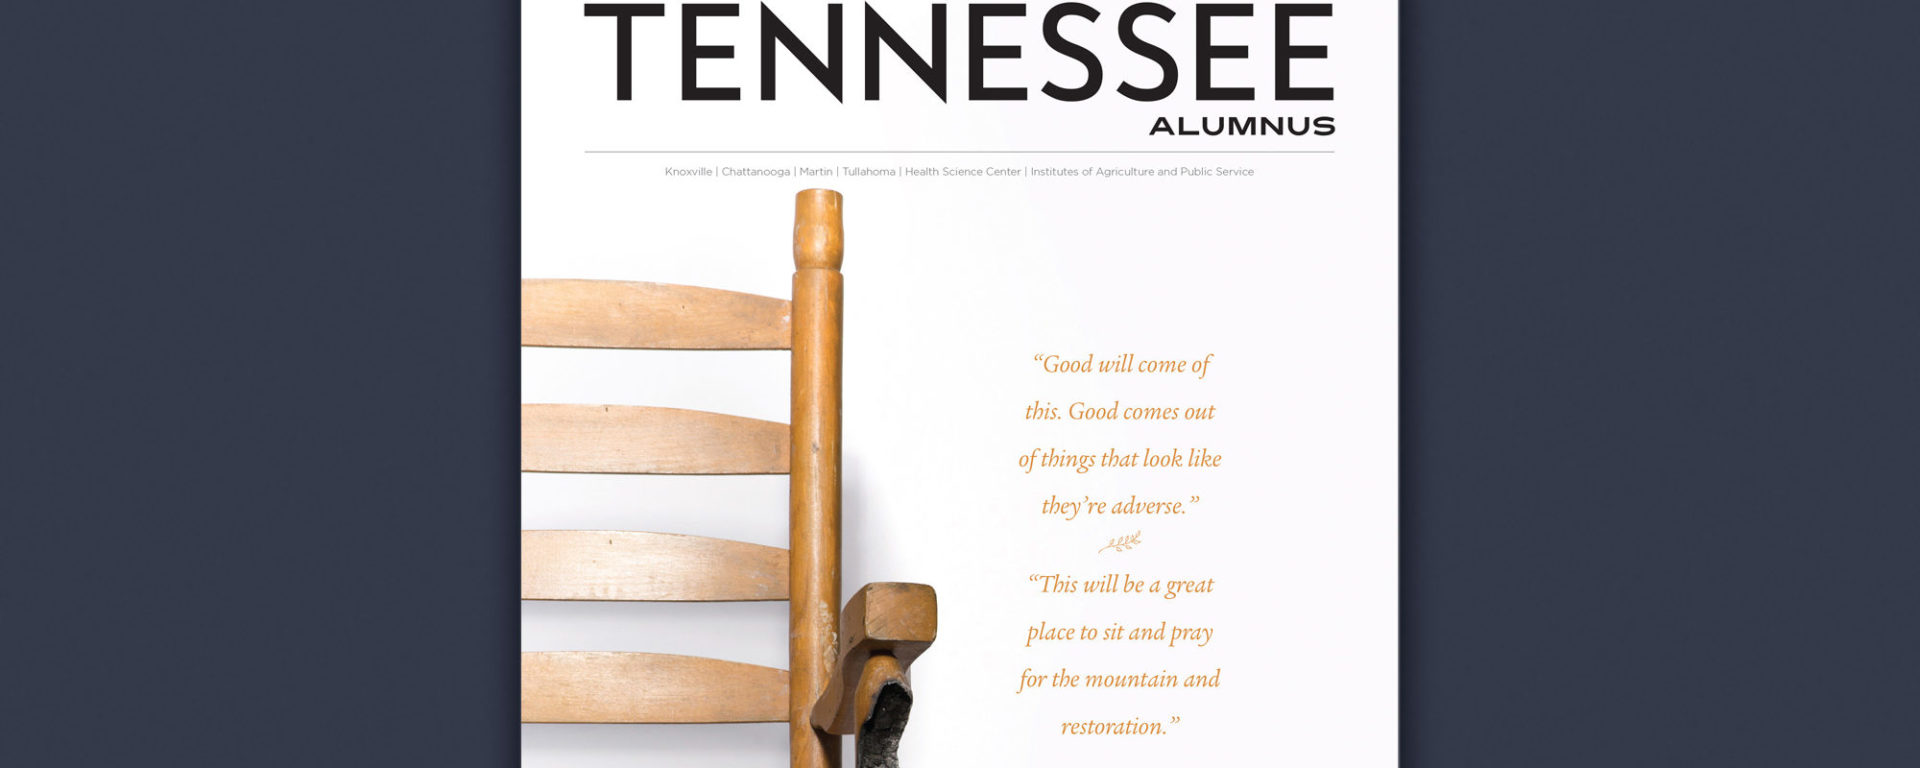 Spring 2017 Tennessee Alumnus cover